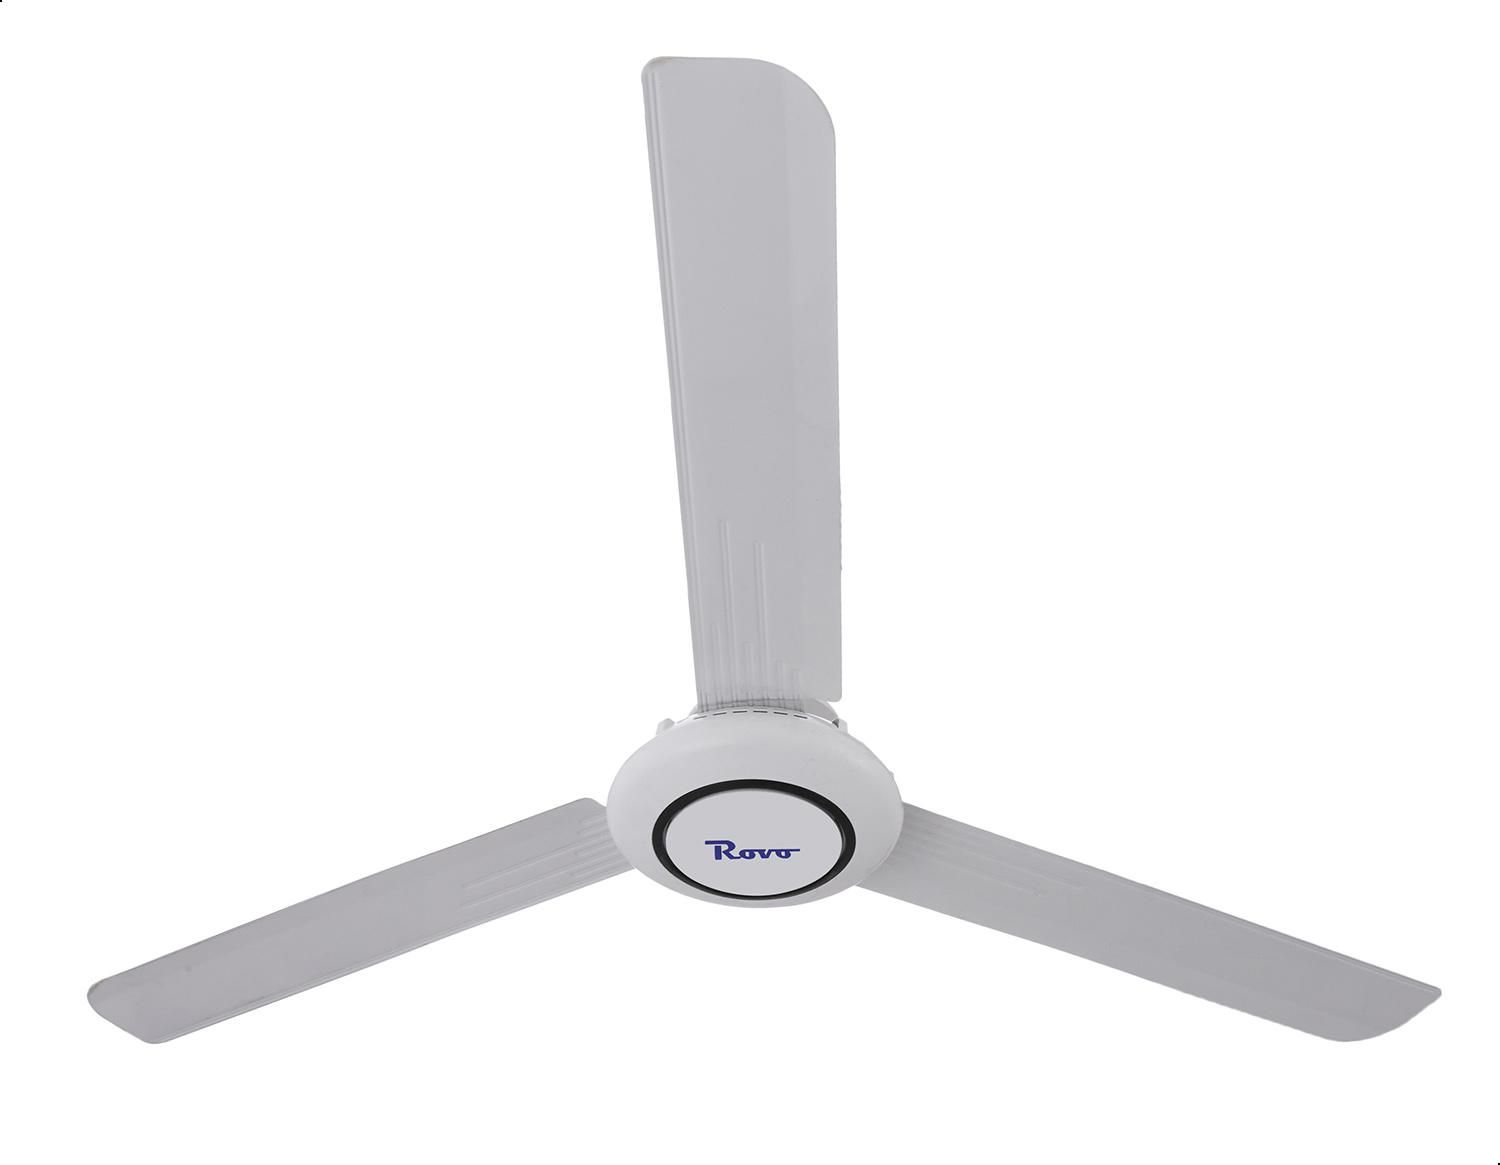 Rovo Ceiling Fan, 56 inch- White